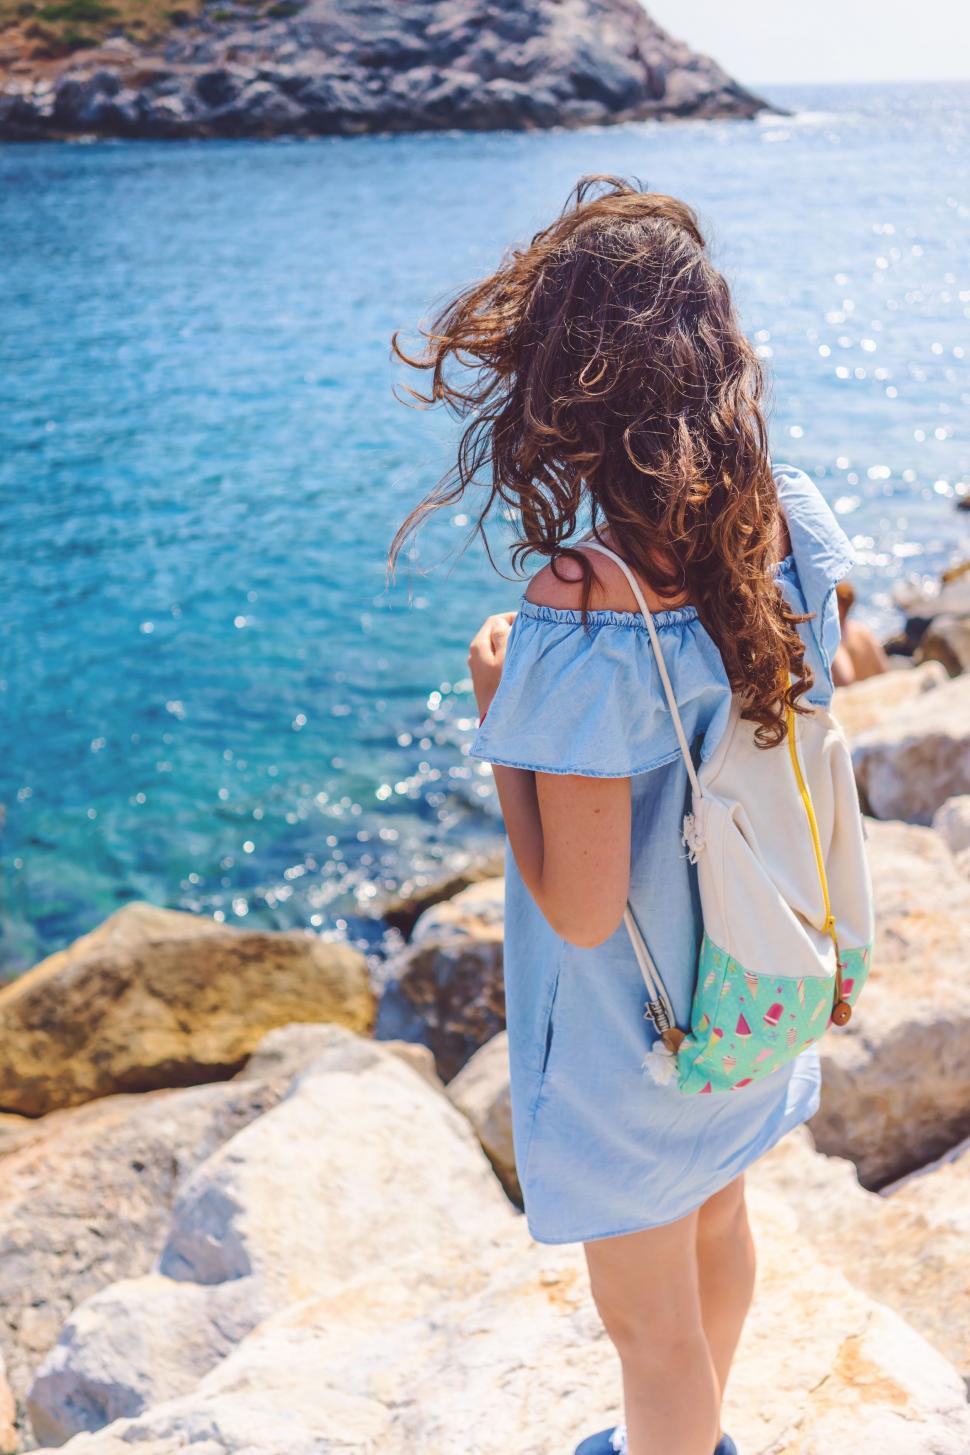 Free Image of Little Girl Standing on Rocks, Looking at Water 